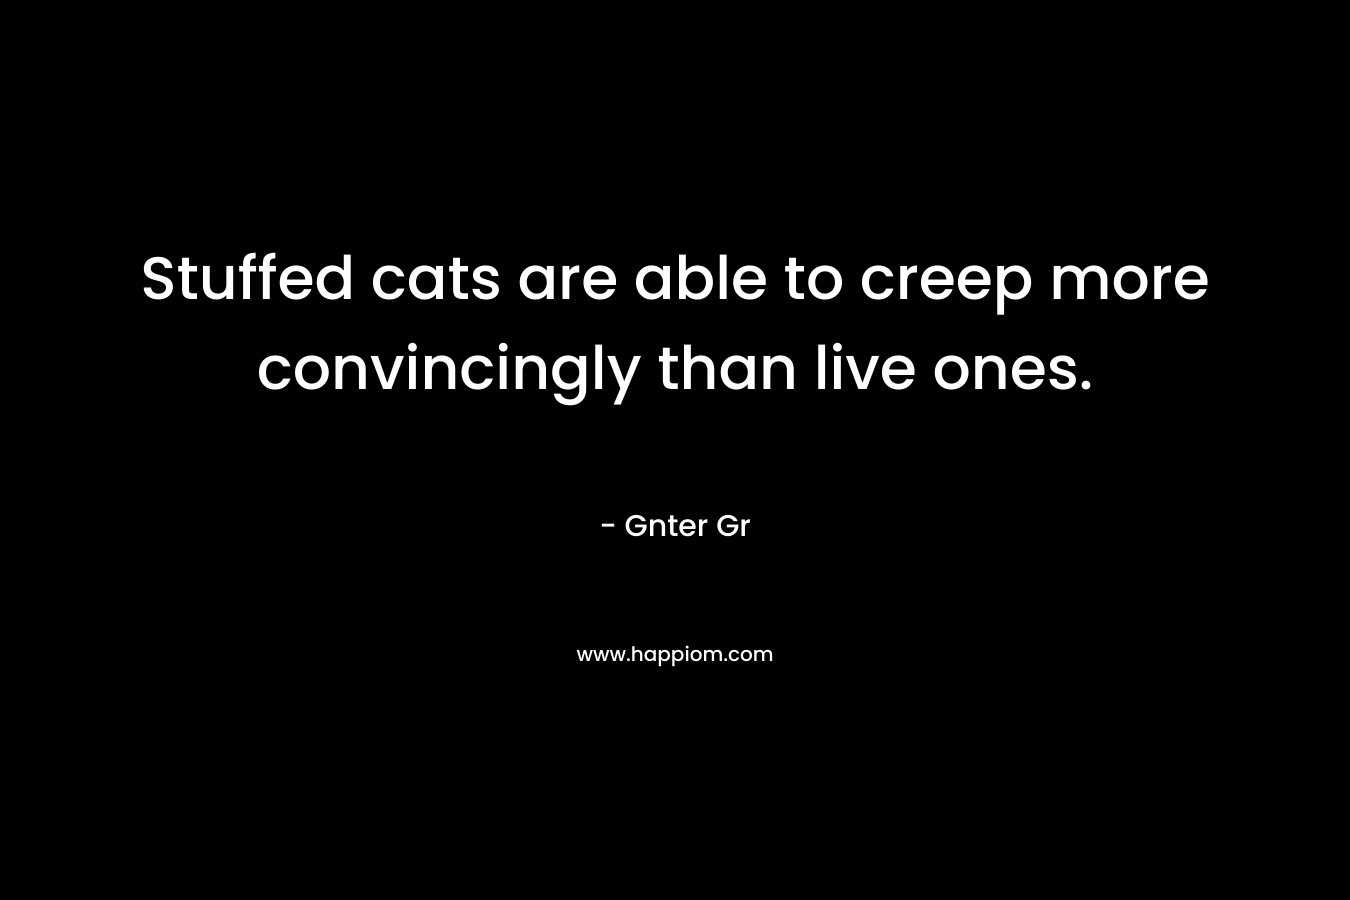 Stuffed cats are able to creep more convincingly than live ones.